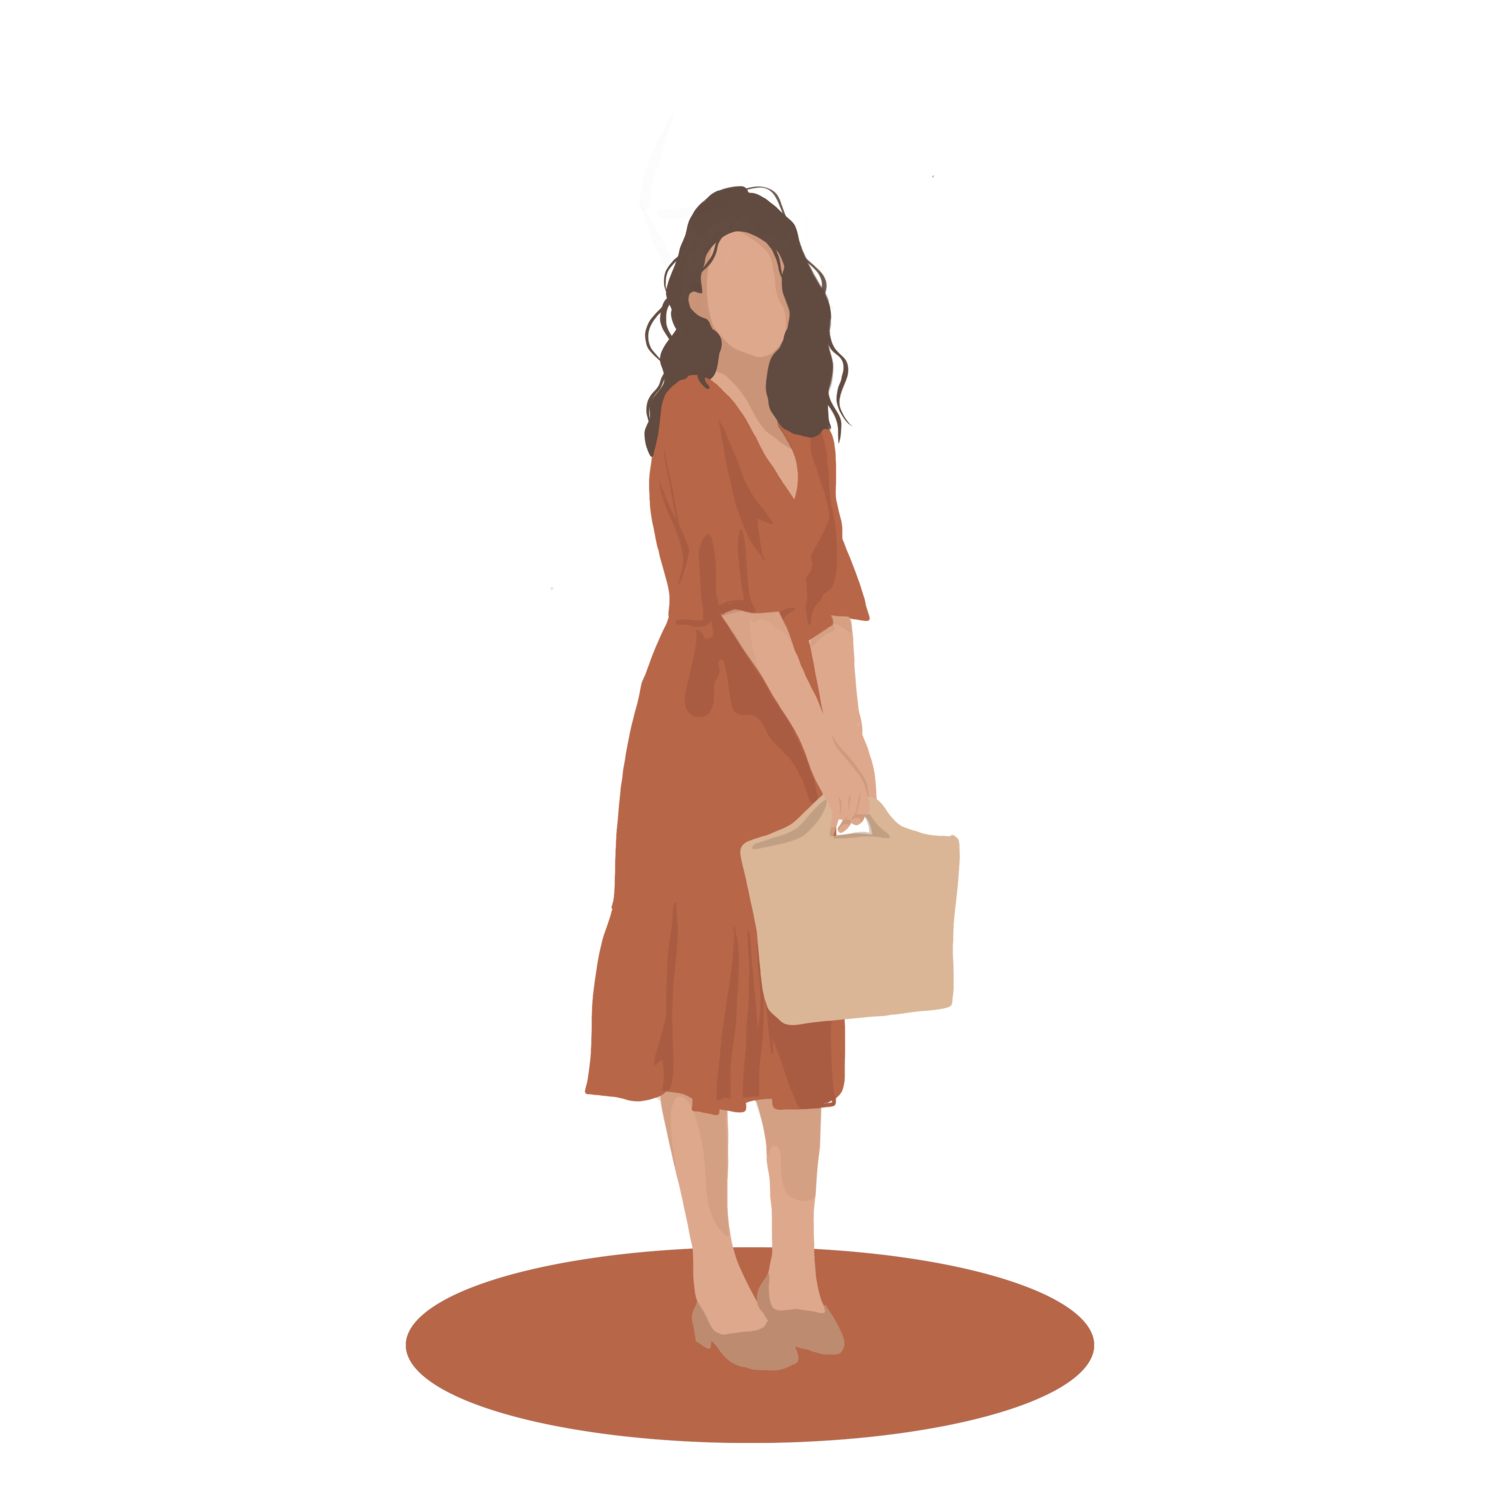 Free Girl / Woman Cutout - Architecture Illustration | Archlibrary